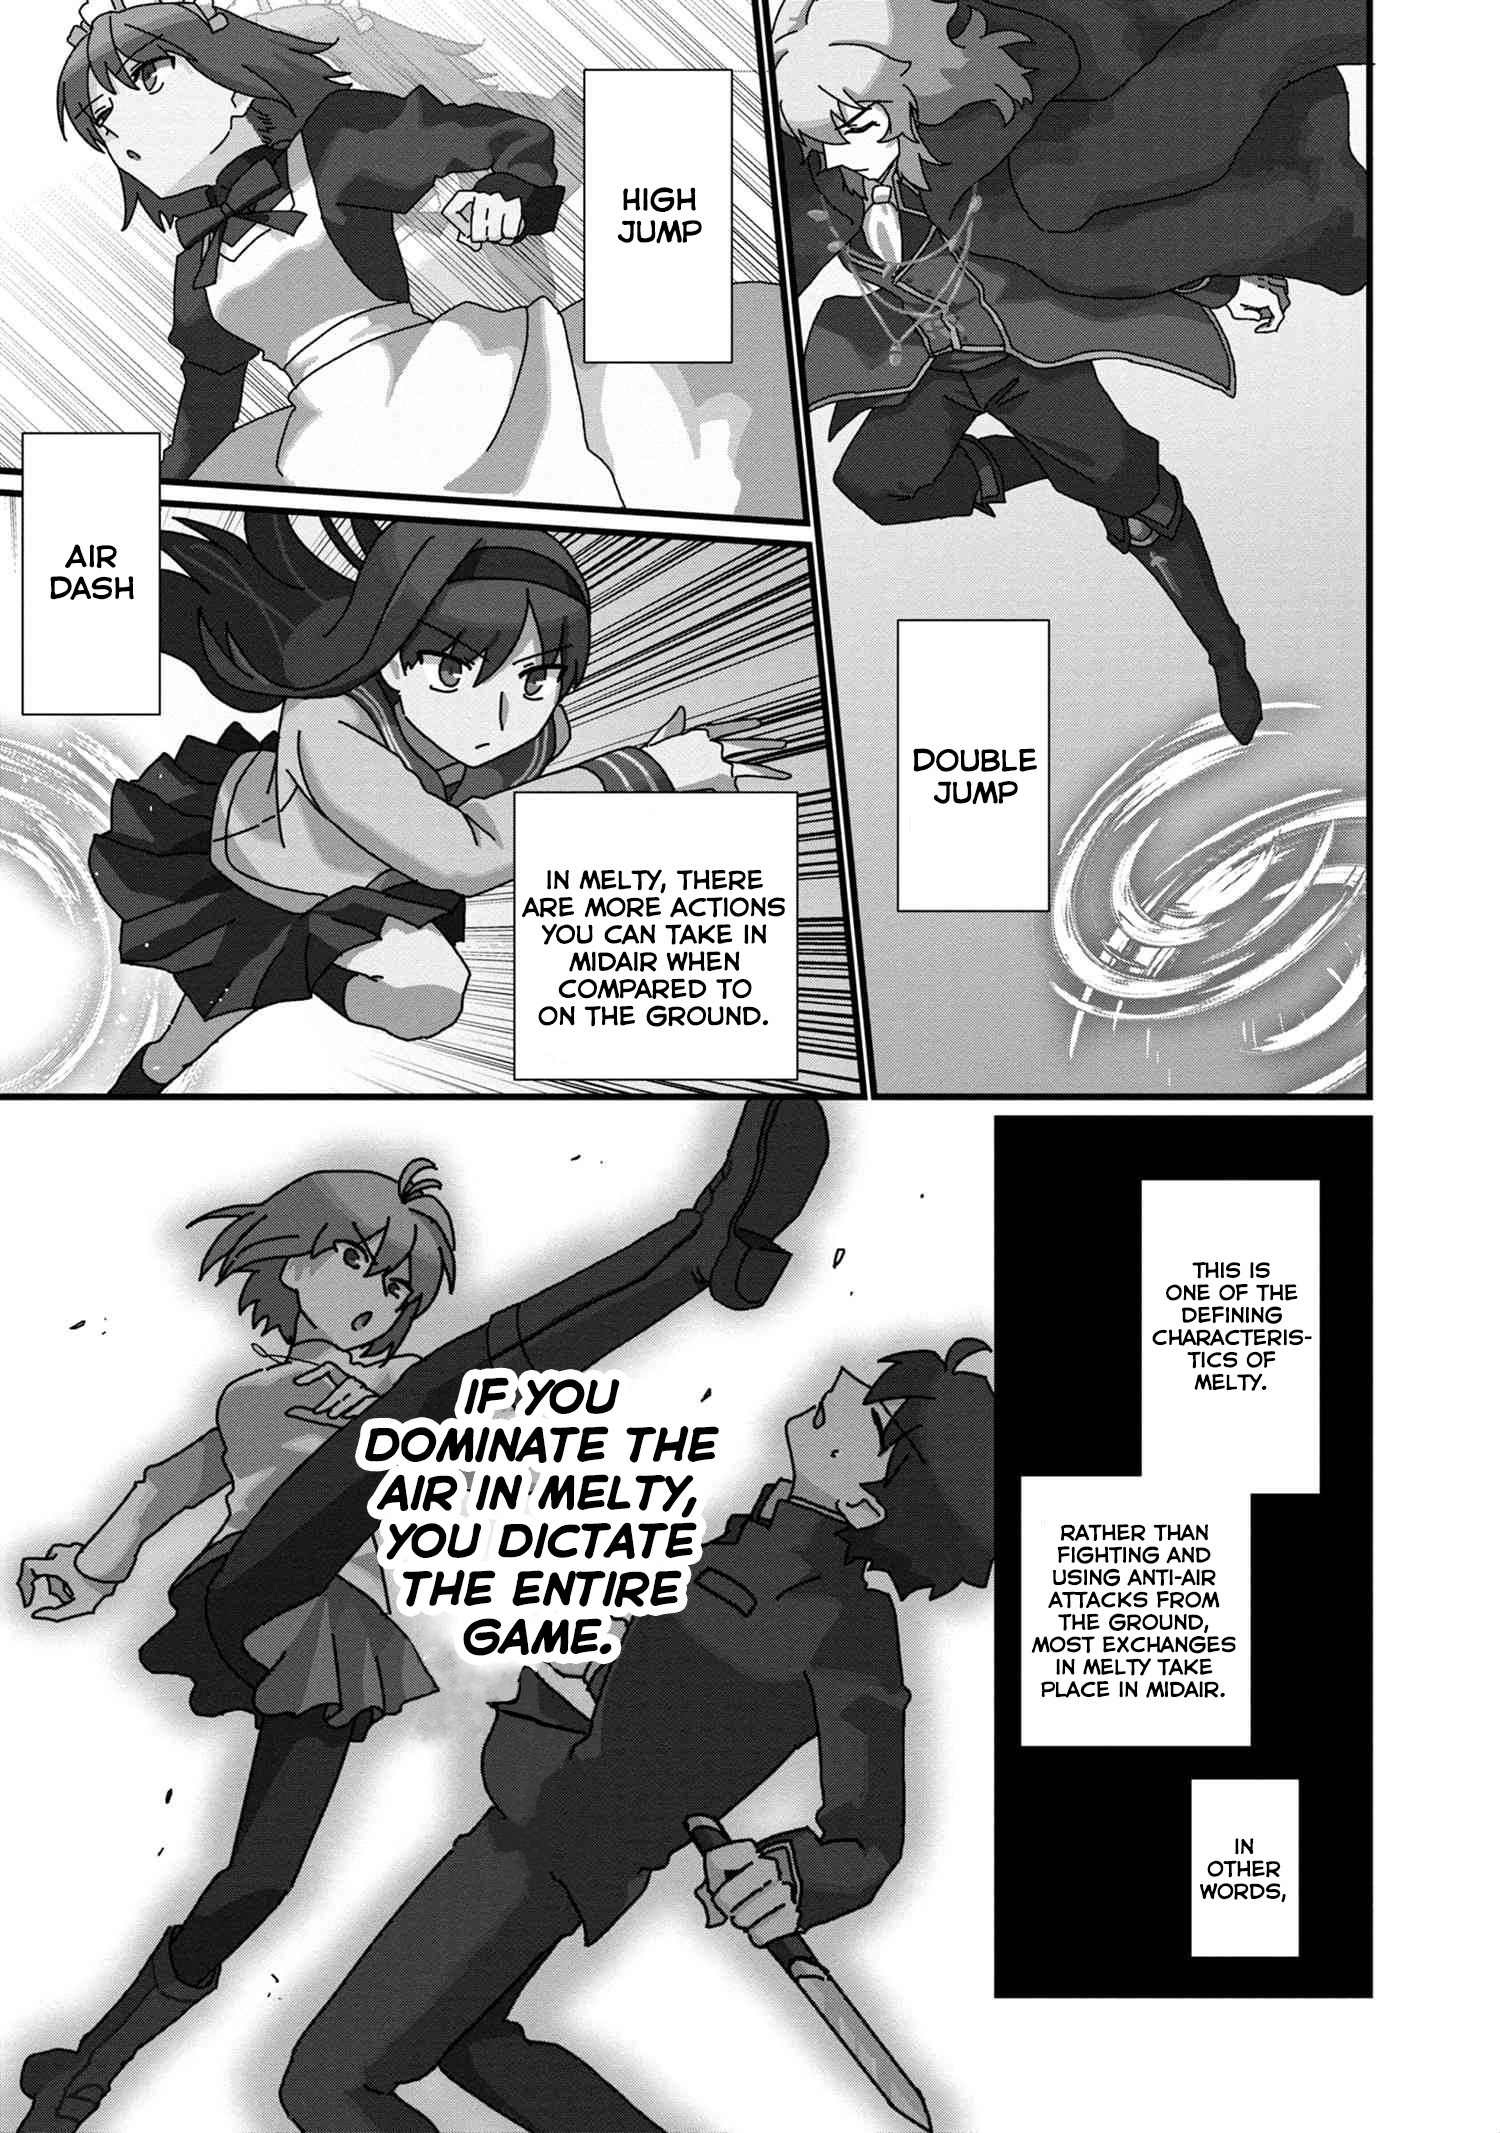 Melty Blood: Type Lumina Piece In Paradise Chapter 7.2 #4